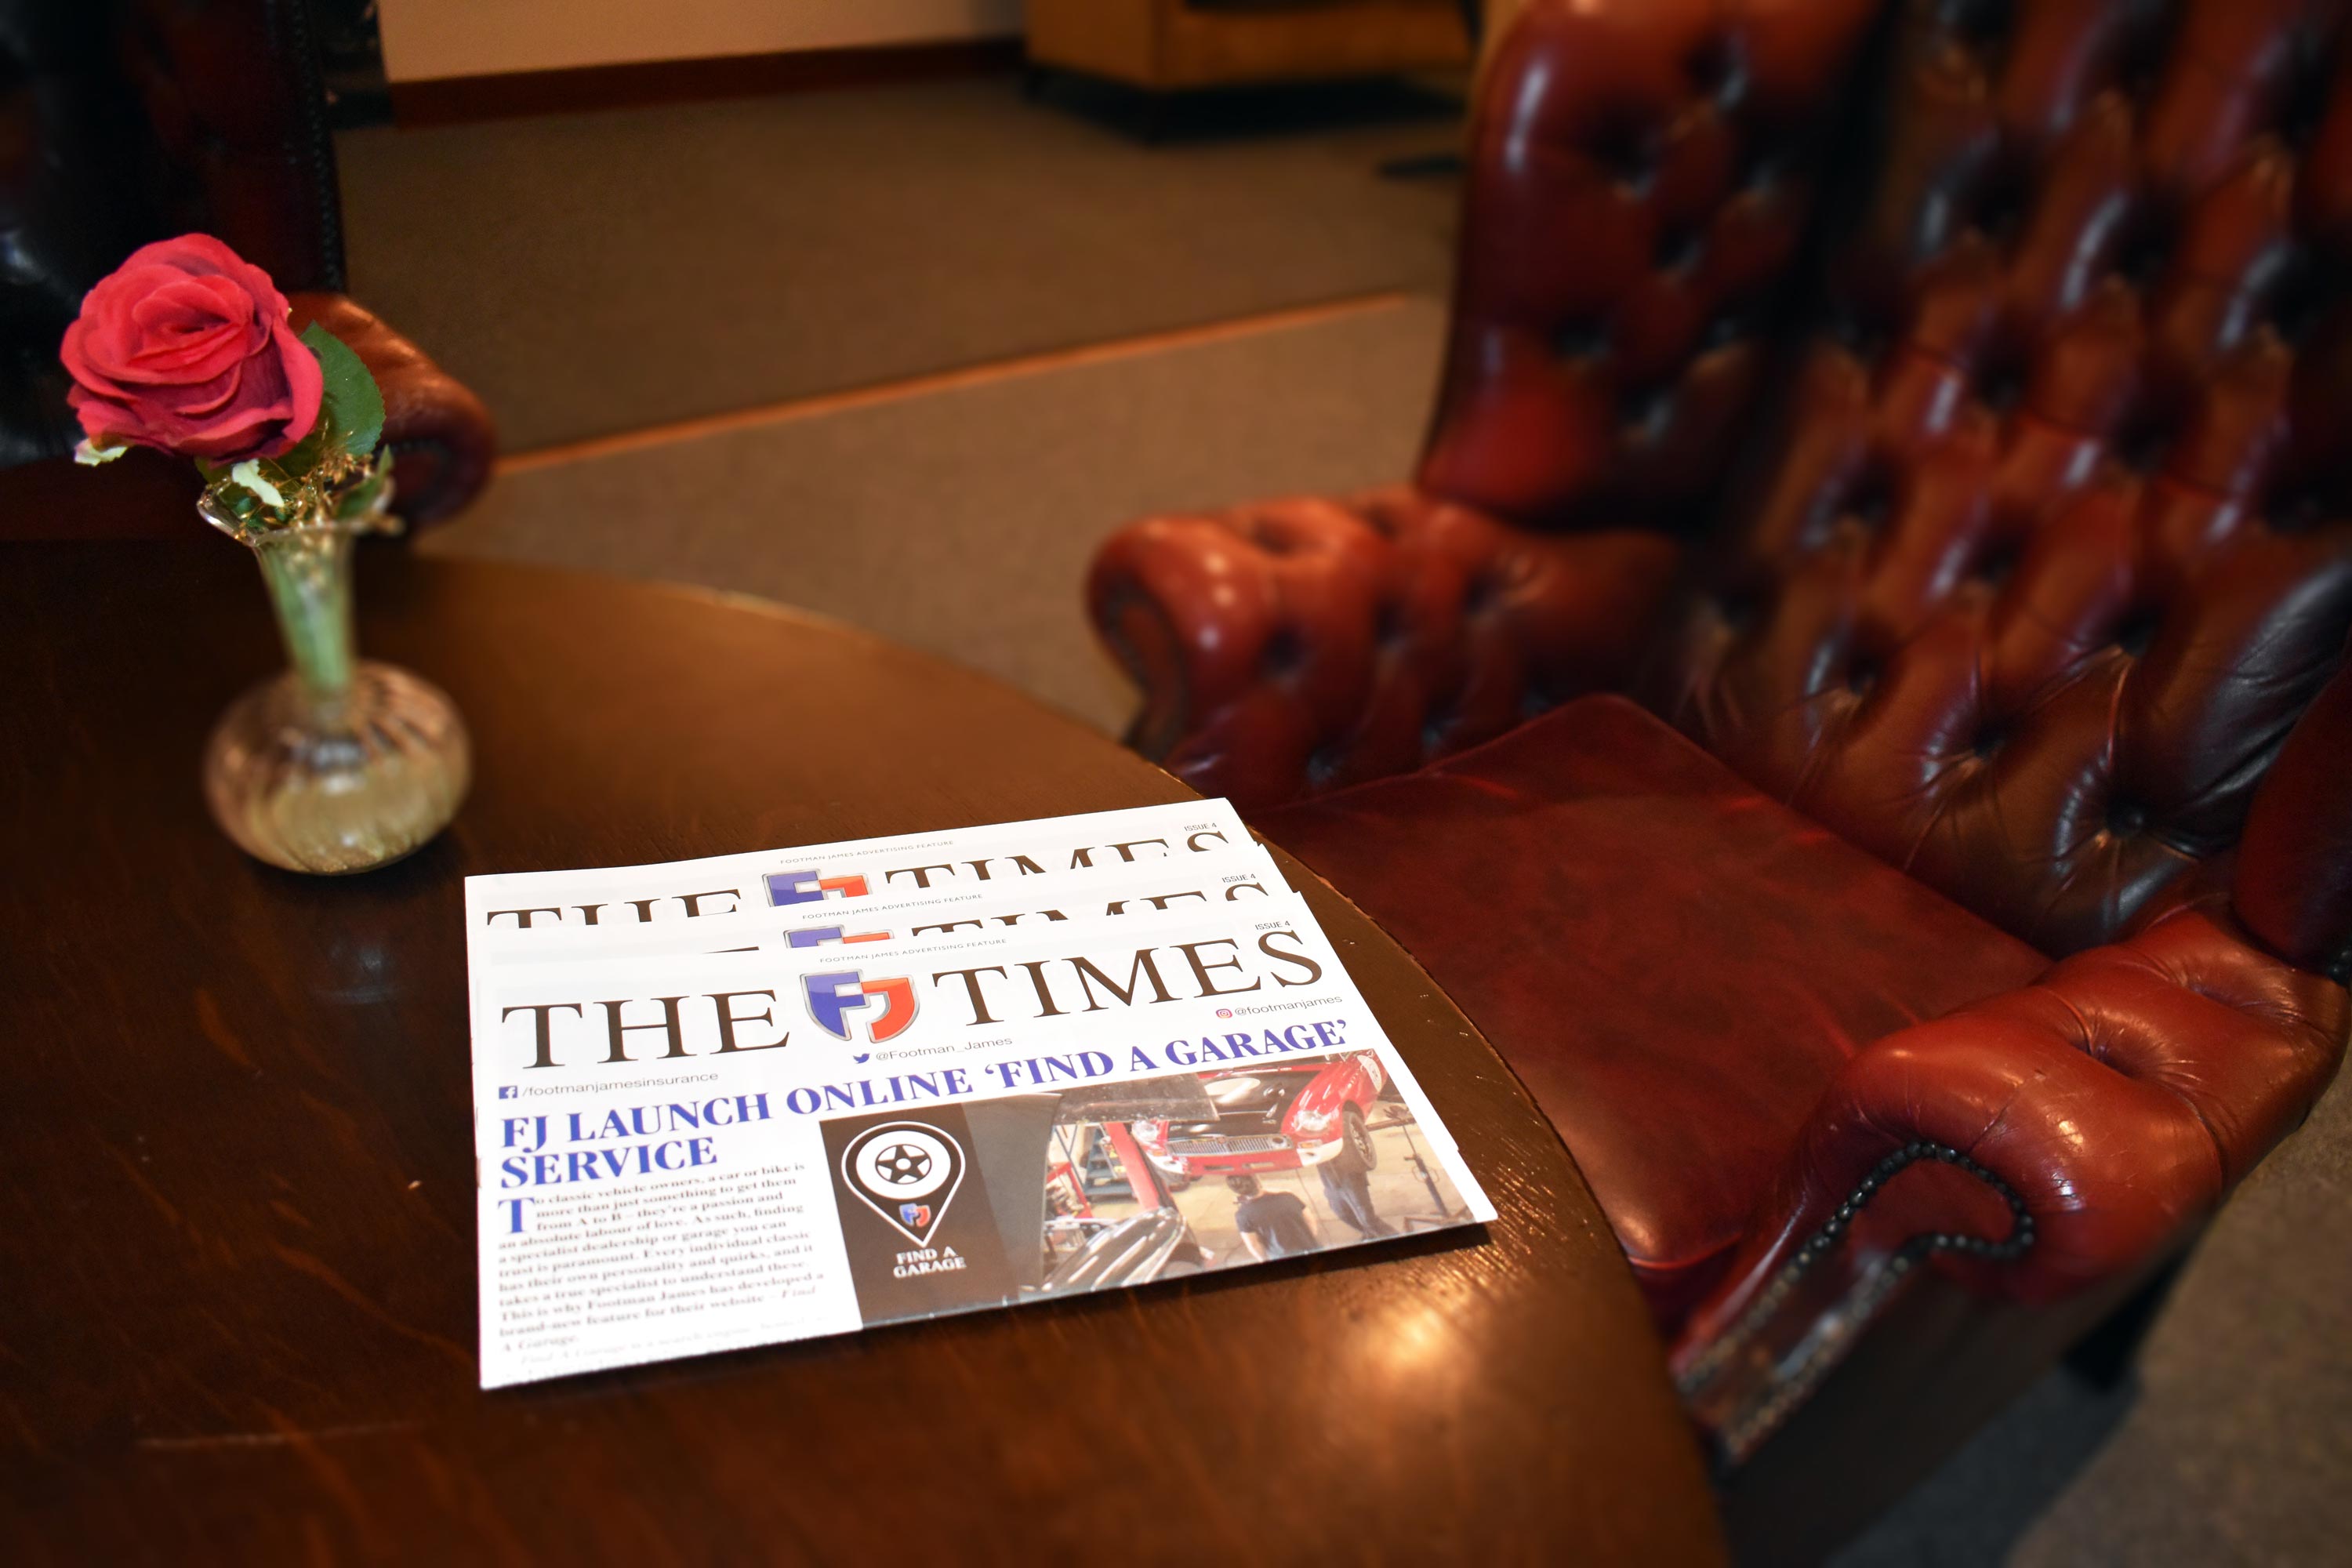 FJ Times Newspaper on a table with a rose